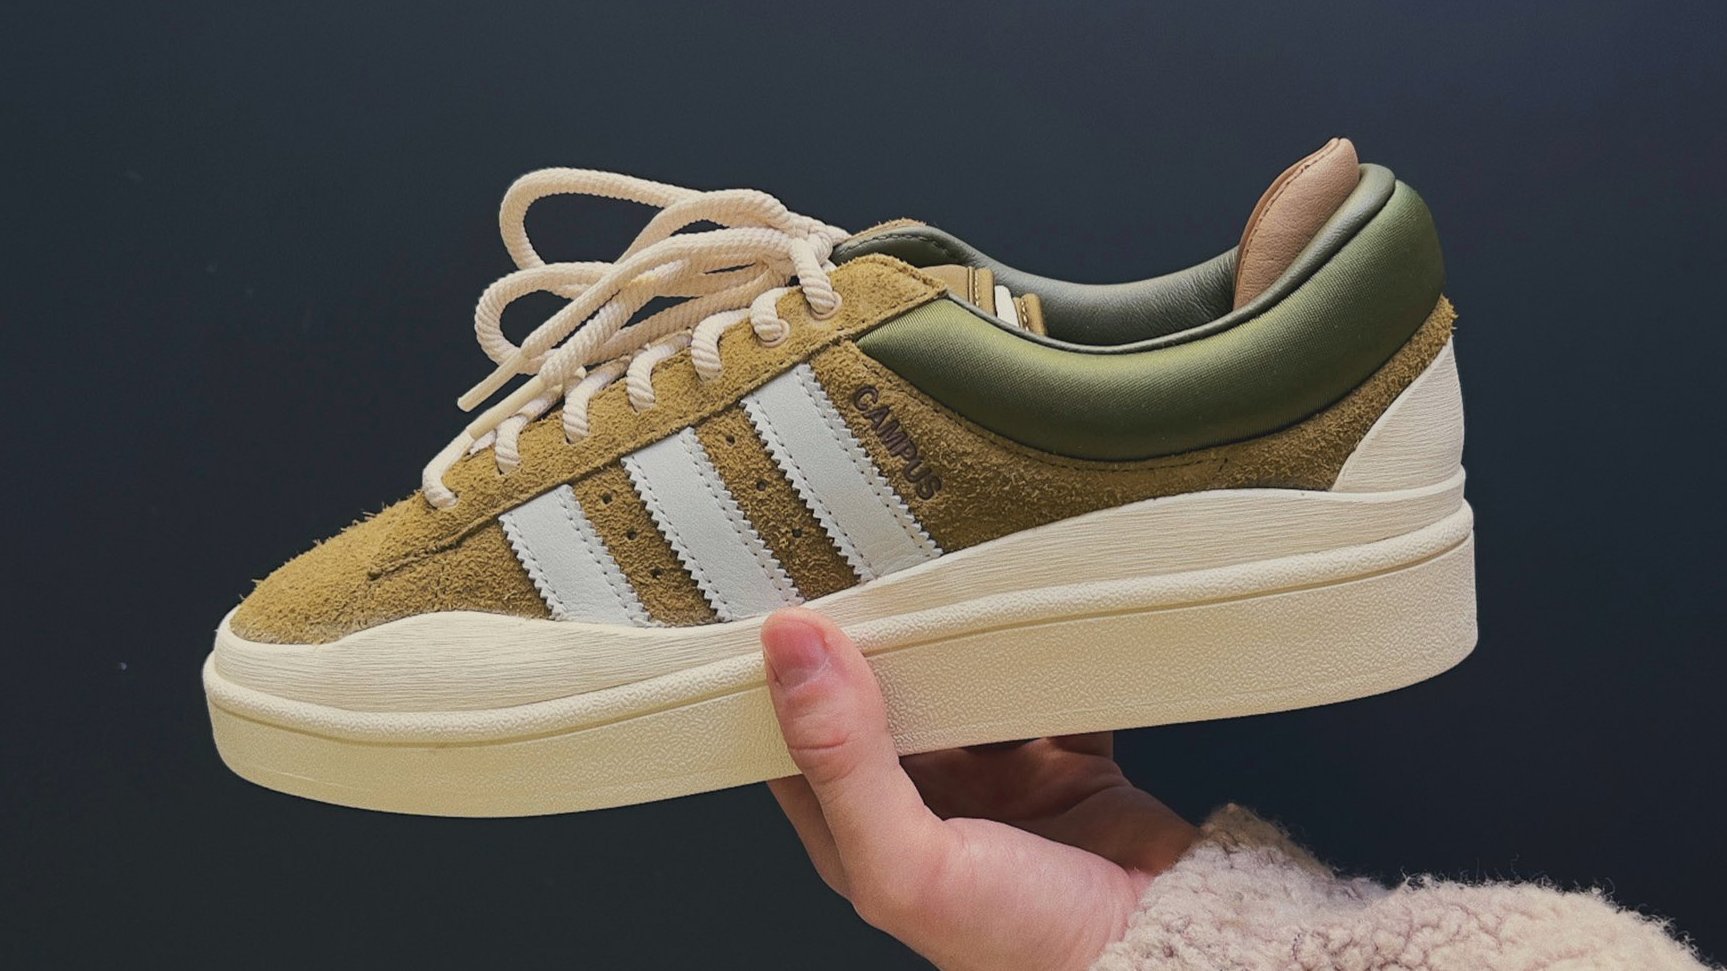 Detailed Look at the 'Olive' Bad Bunny x Adidas Campus